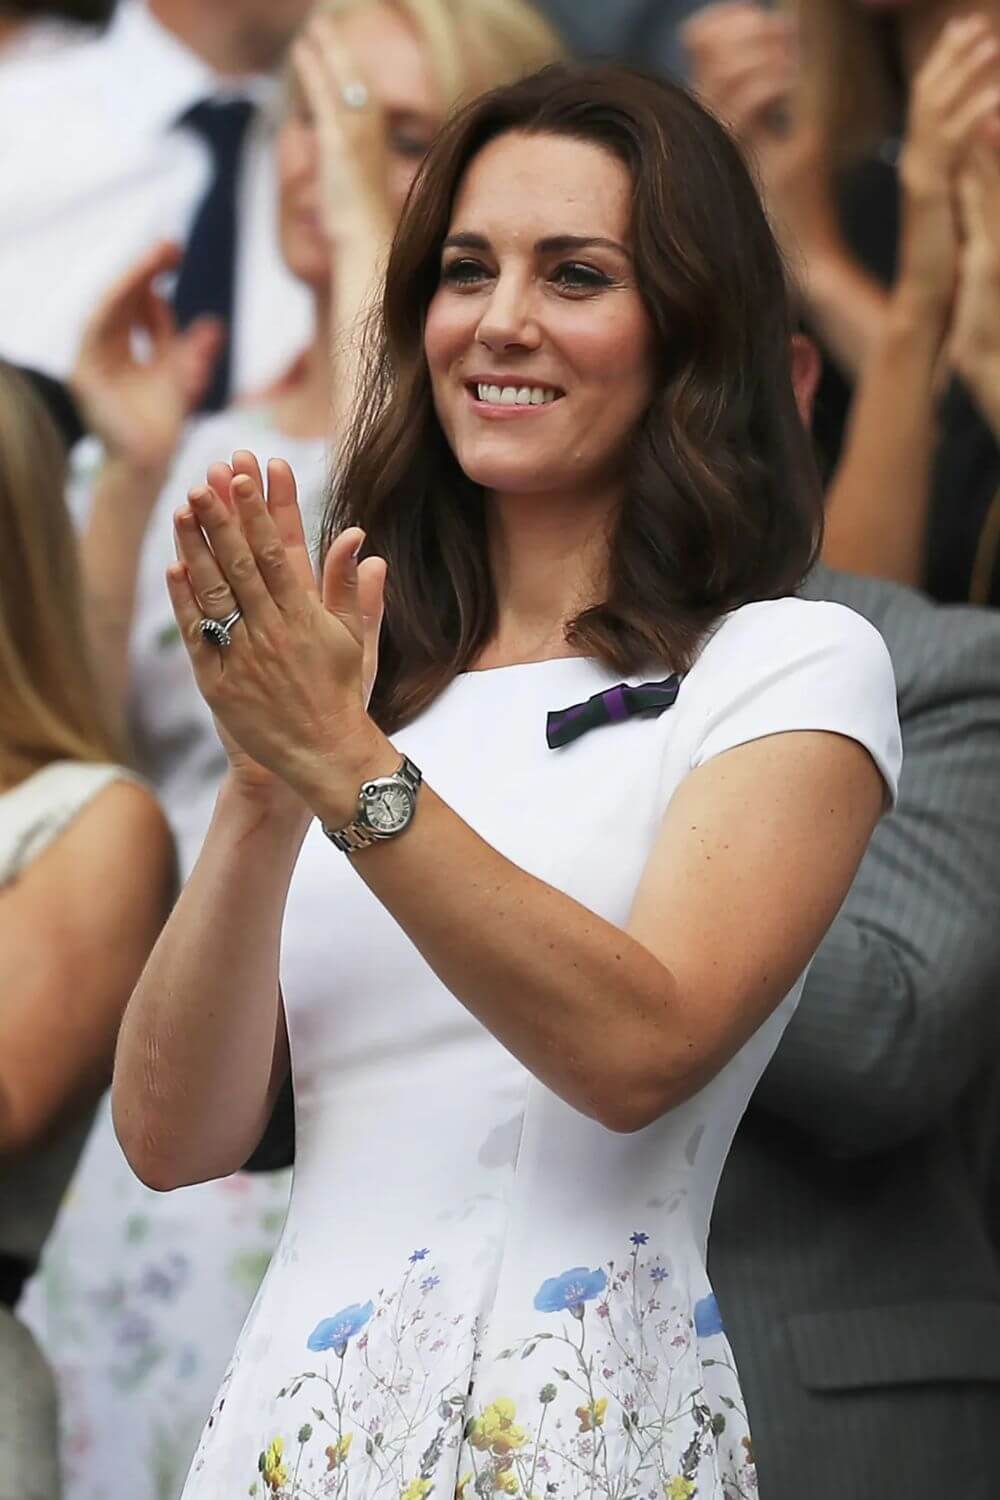 Kate Middleton with a wrist watch paired with a casual outfit